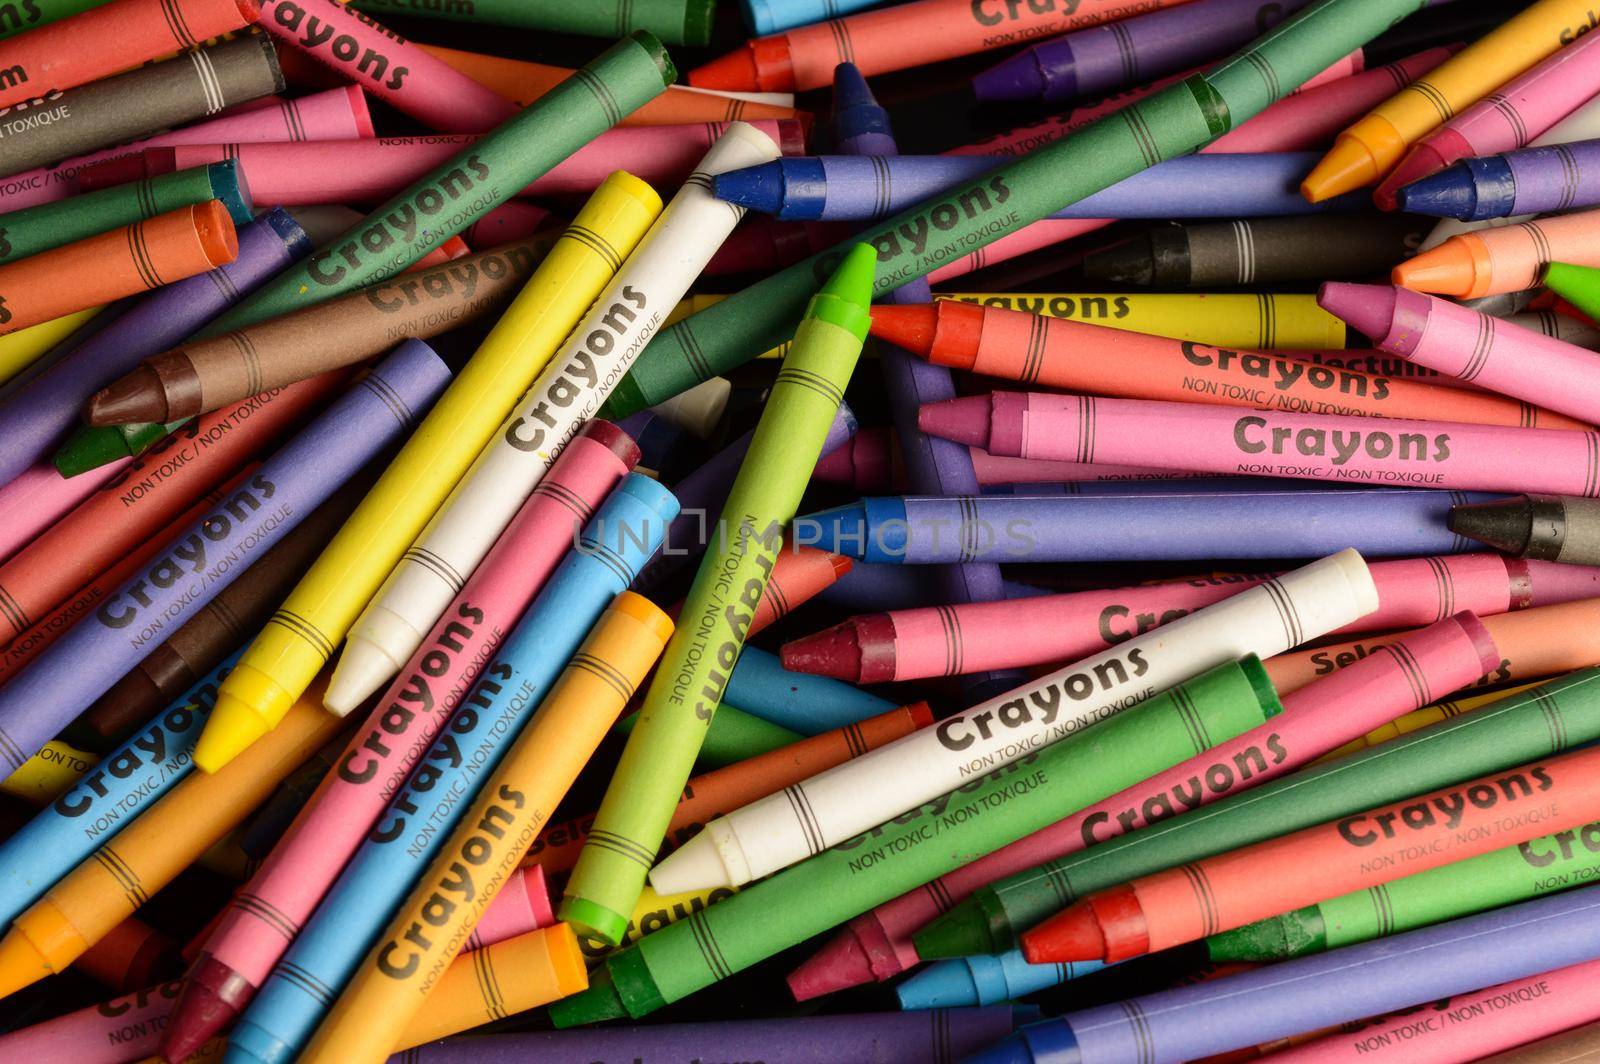 A macro shot of various crayons to make a full frame background image of vibrant colors.